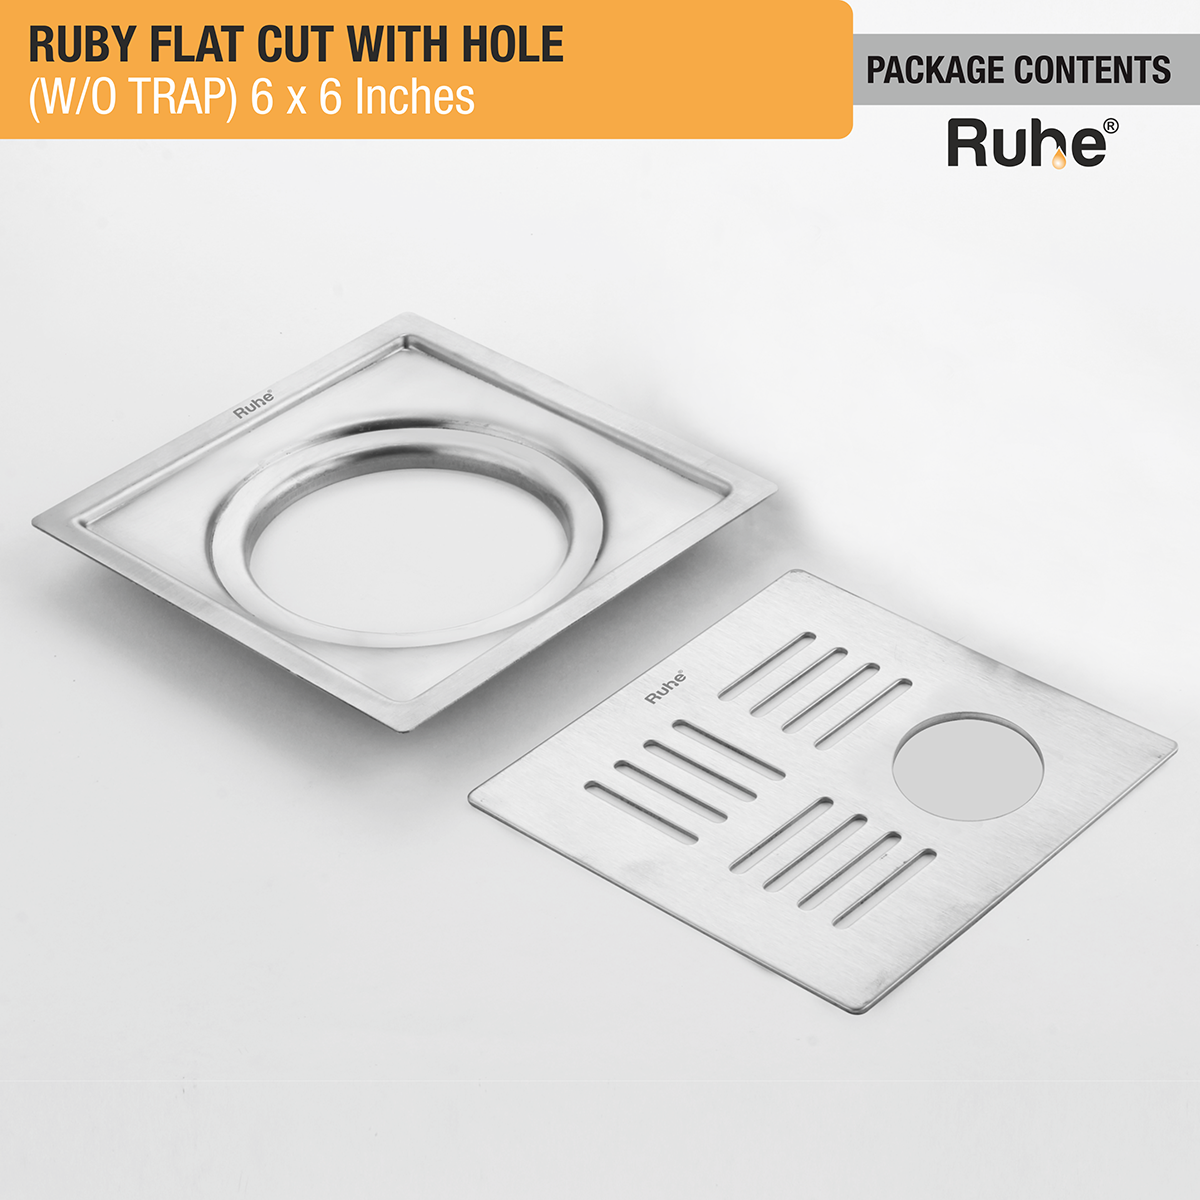 Ruby Square Flat Cut 304-Grade Floor Drain with Hole (6 x 6 Inches) package